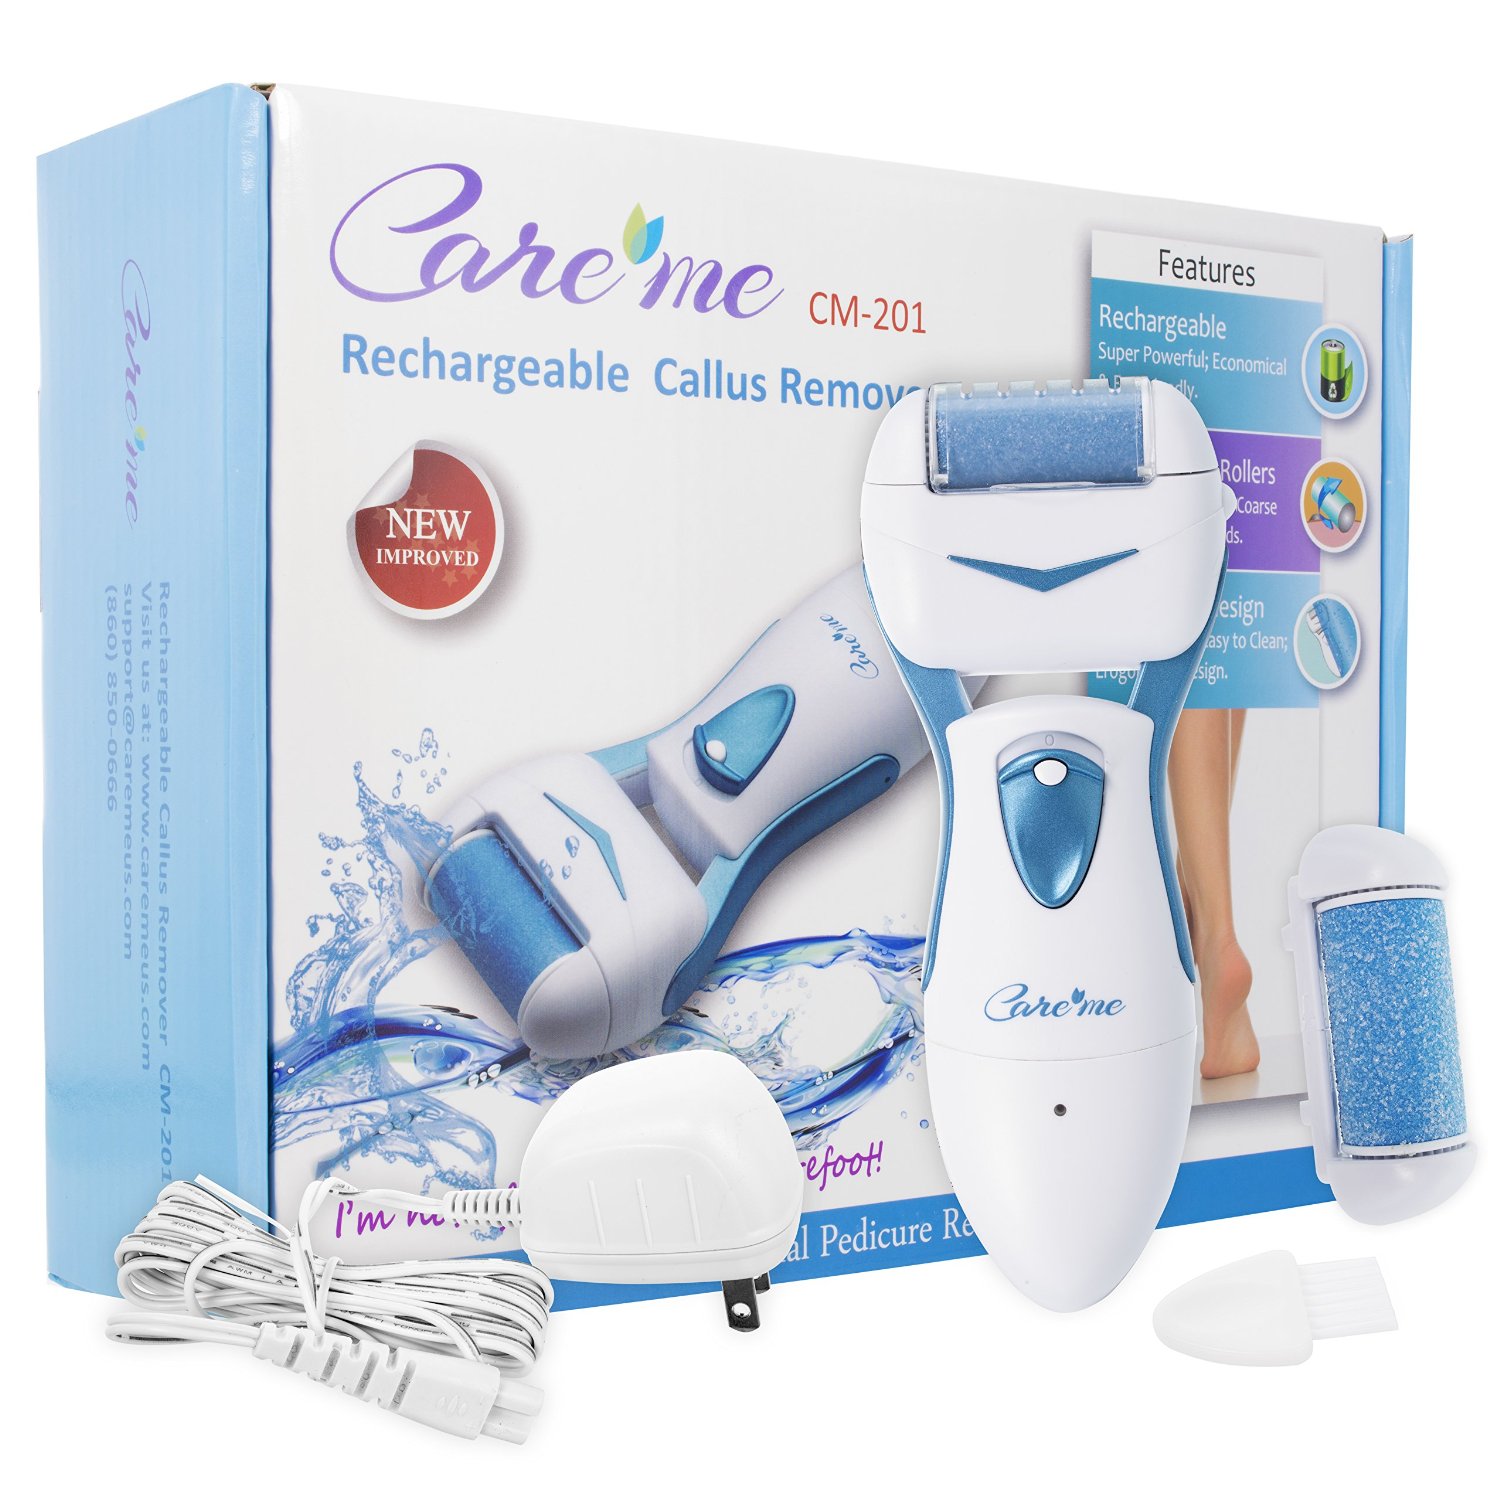 Care me Electric Foot Callus Removers Rechargeable ? Electronic Foot Grinder Files Away Dry, Dead, Hard, Skin & Calluses- Best Foot Care Pedicure Tool for Spa-Like Smooth Soft Feet